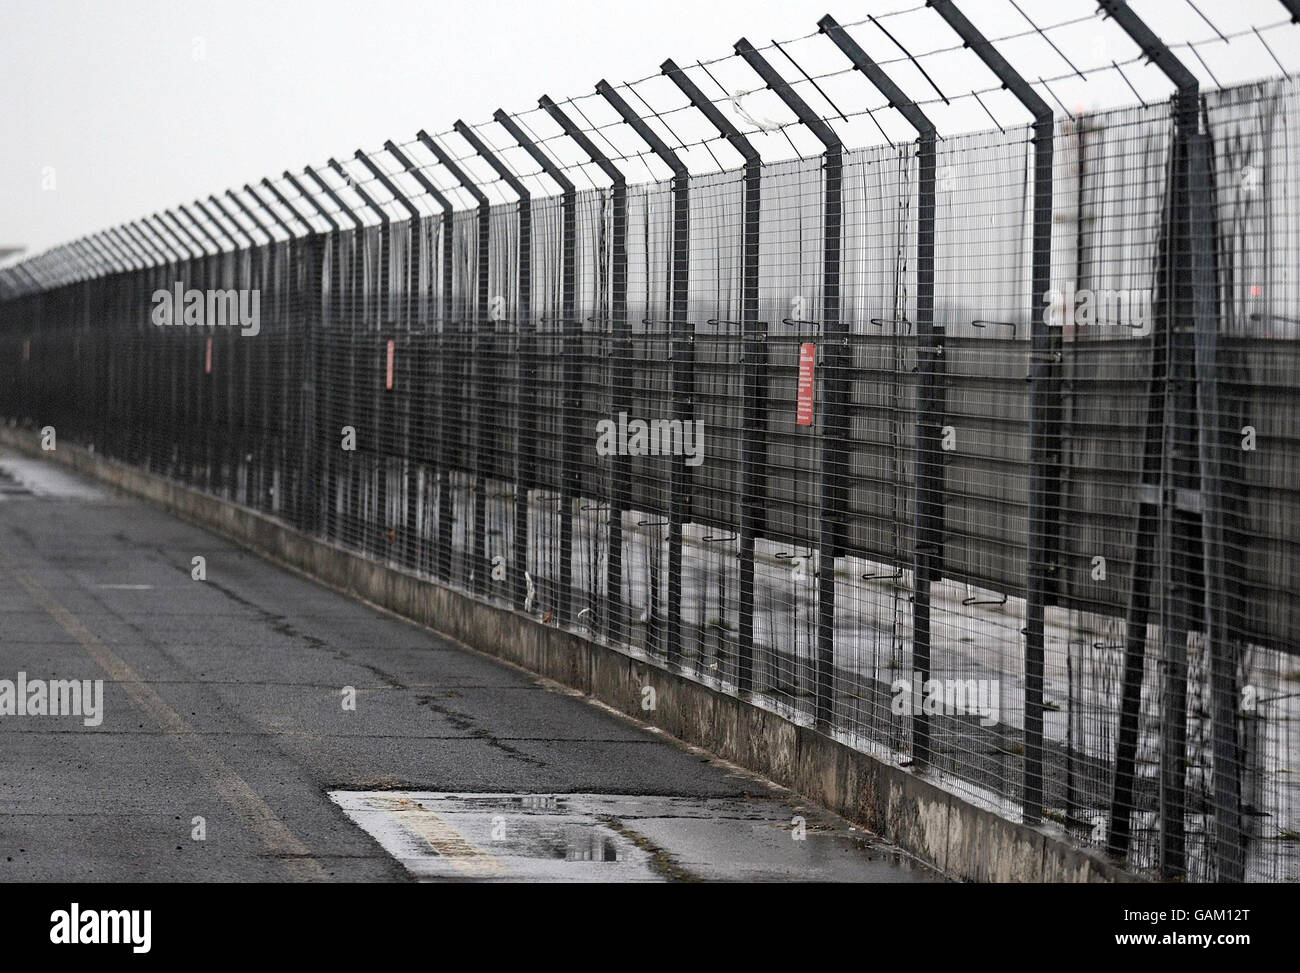 The perimeter fence around Heathrow Airport on the north side, where a man climbed over this afternoon, sparking a security scare at the airport. Stock Photo